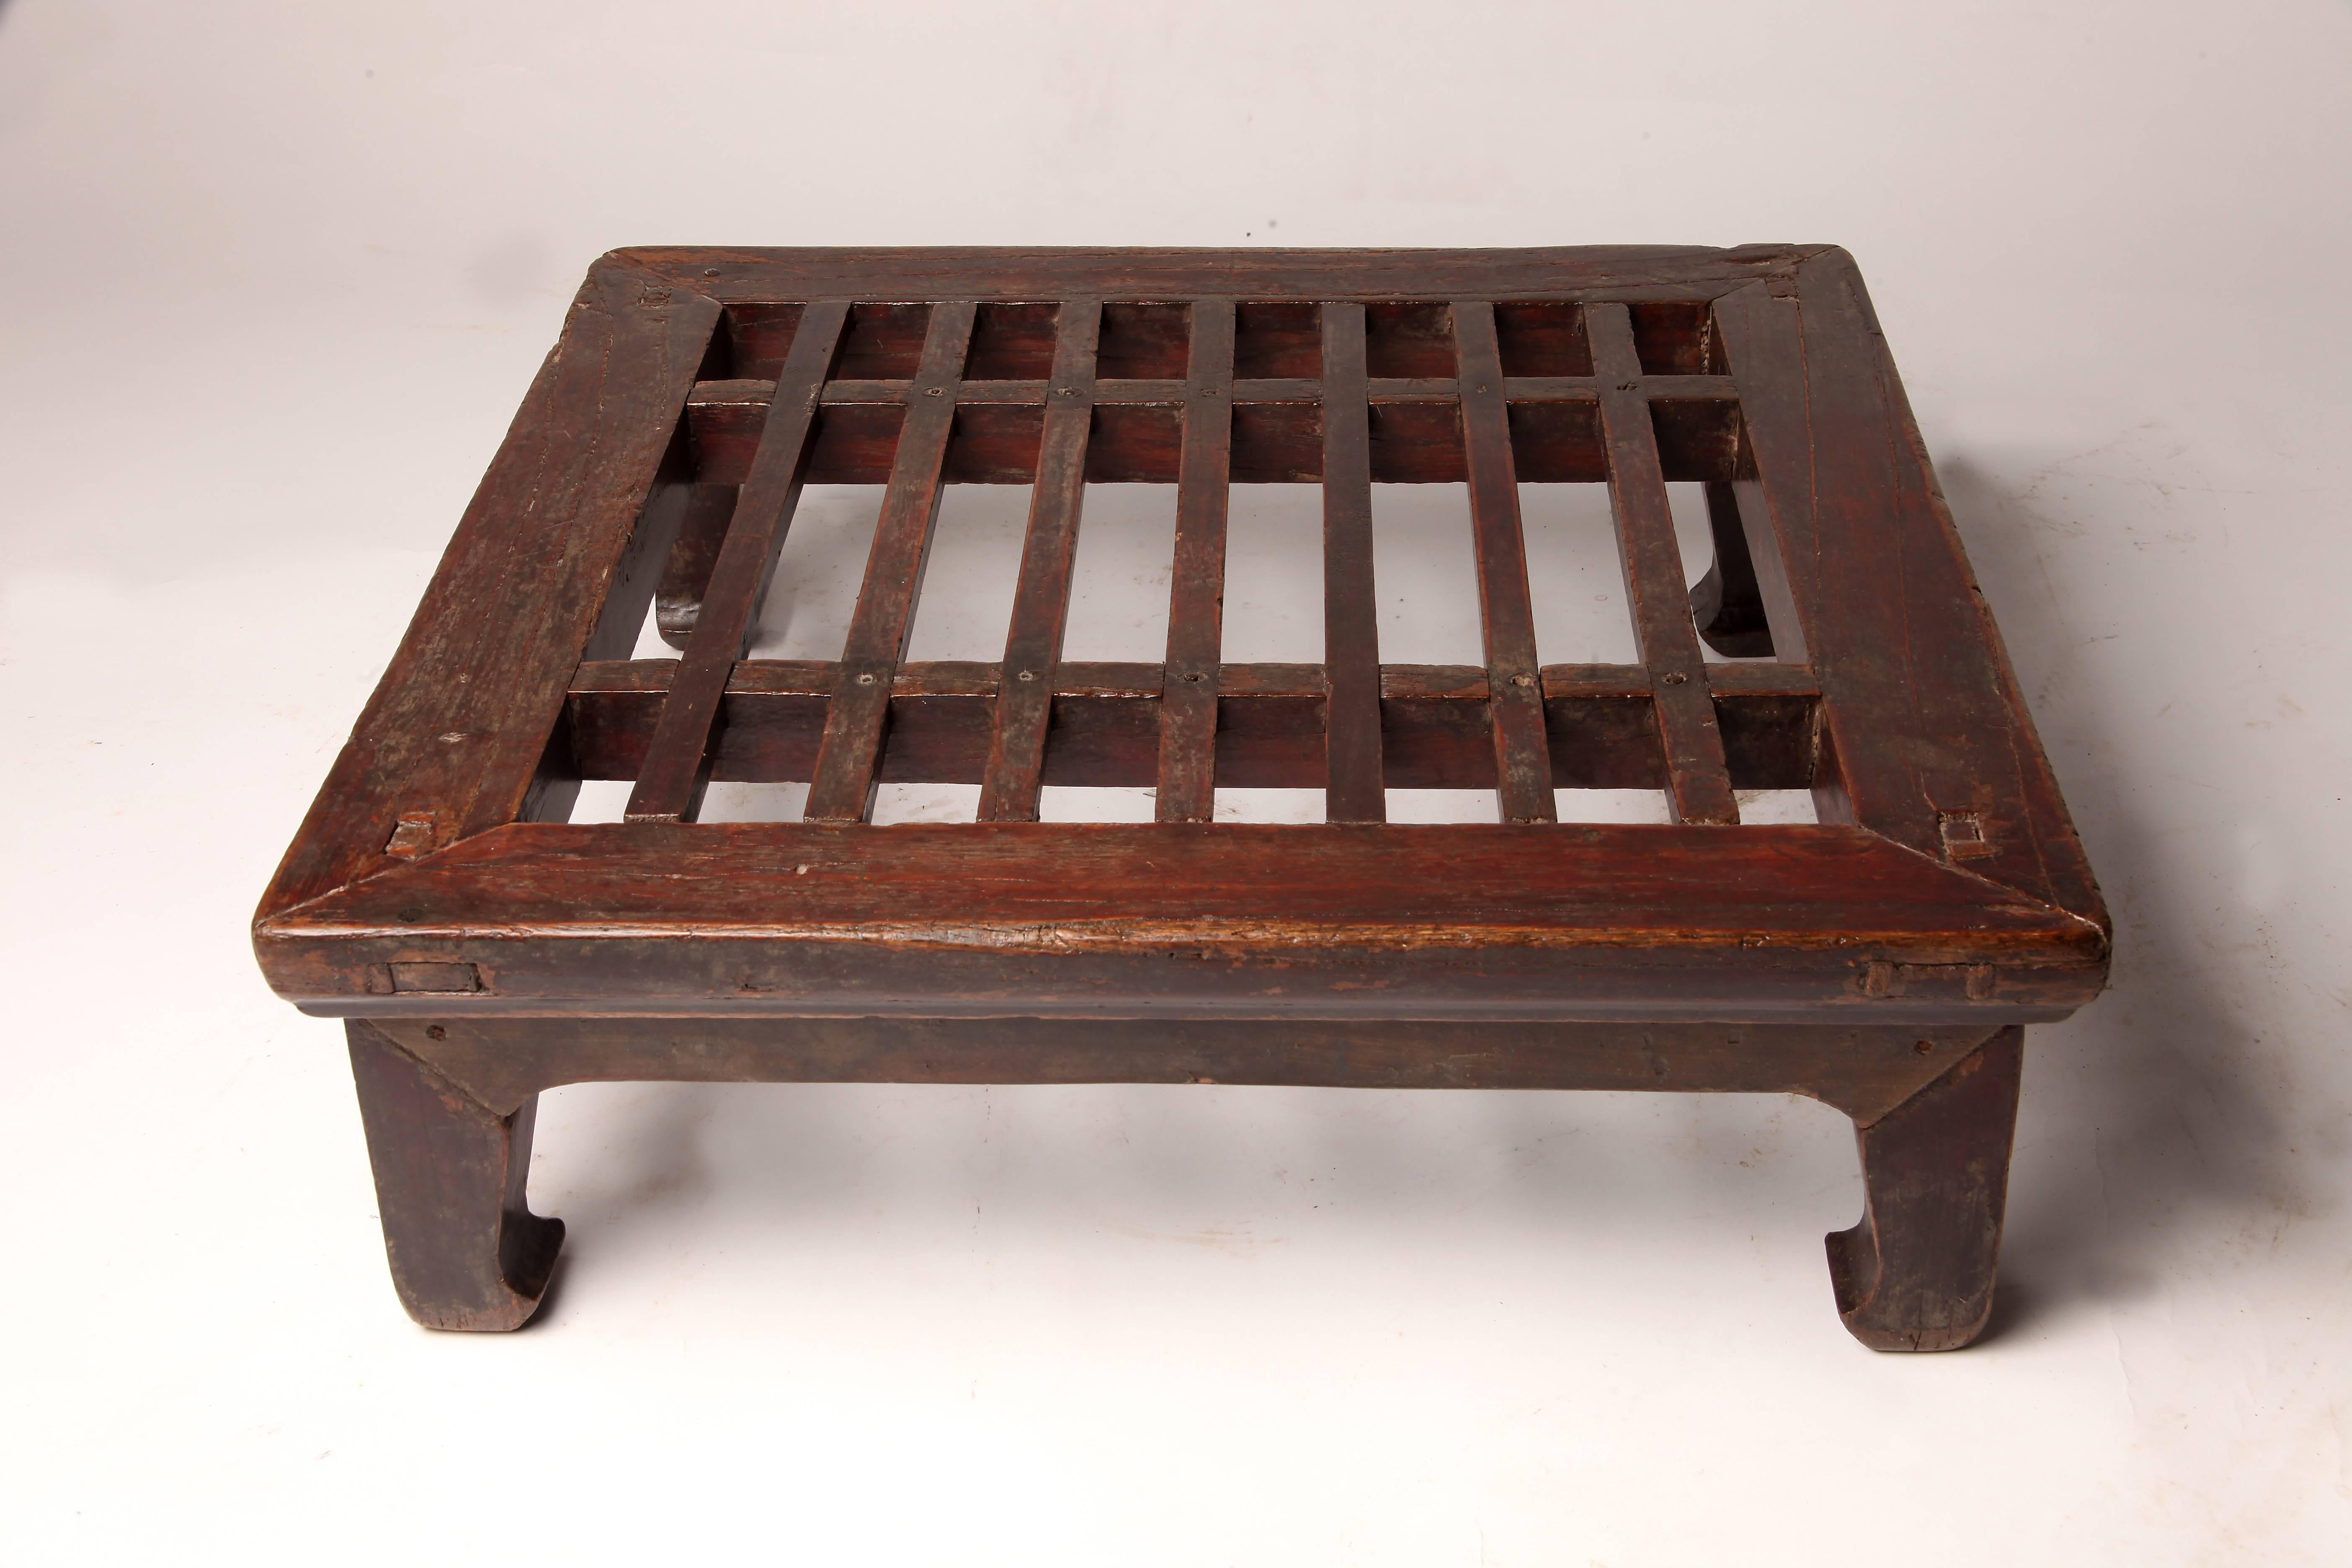 This foot stool is from China and is made from elmwood, circa 1880.